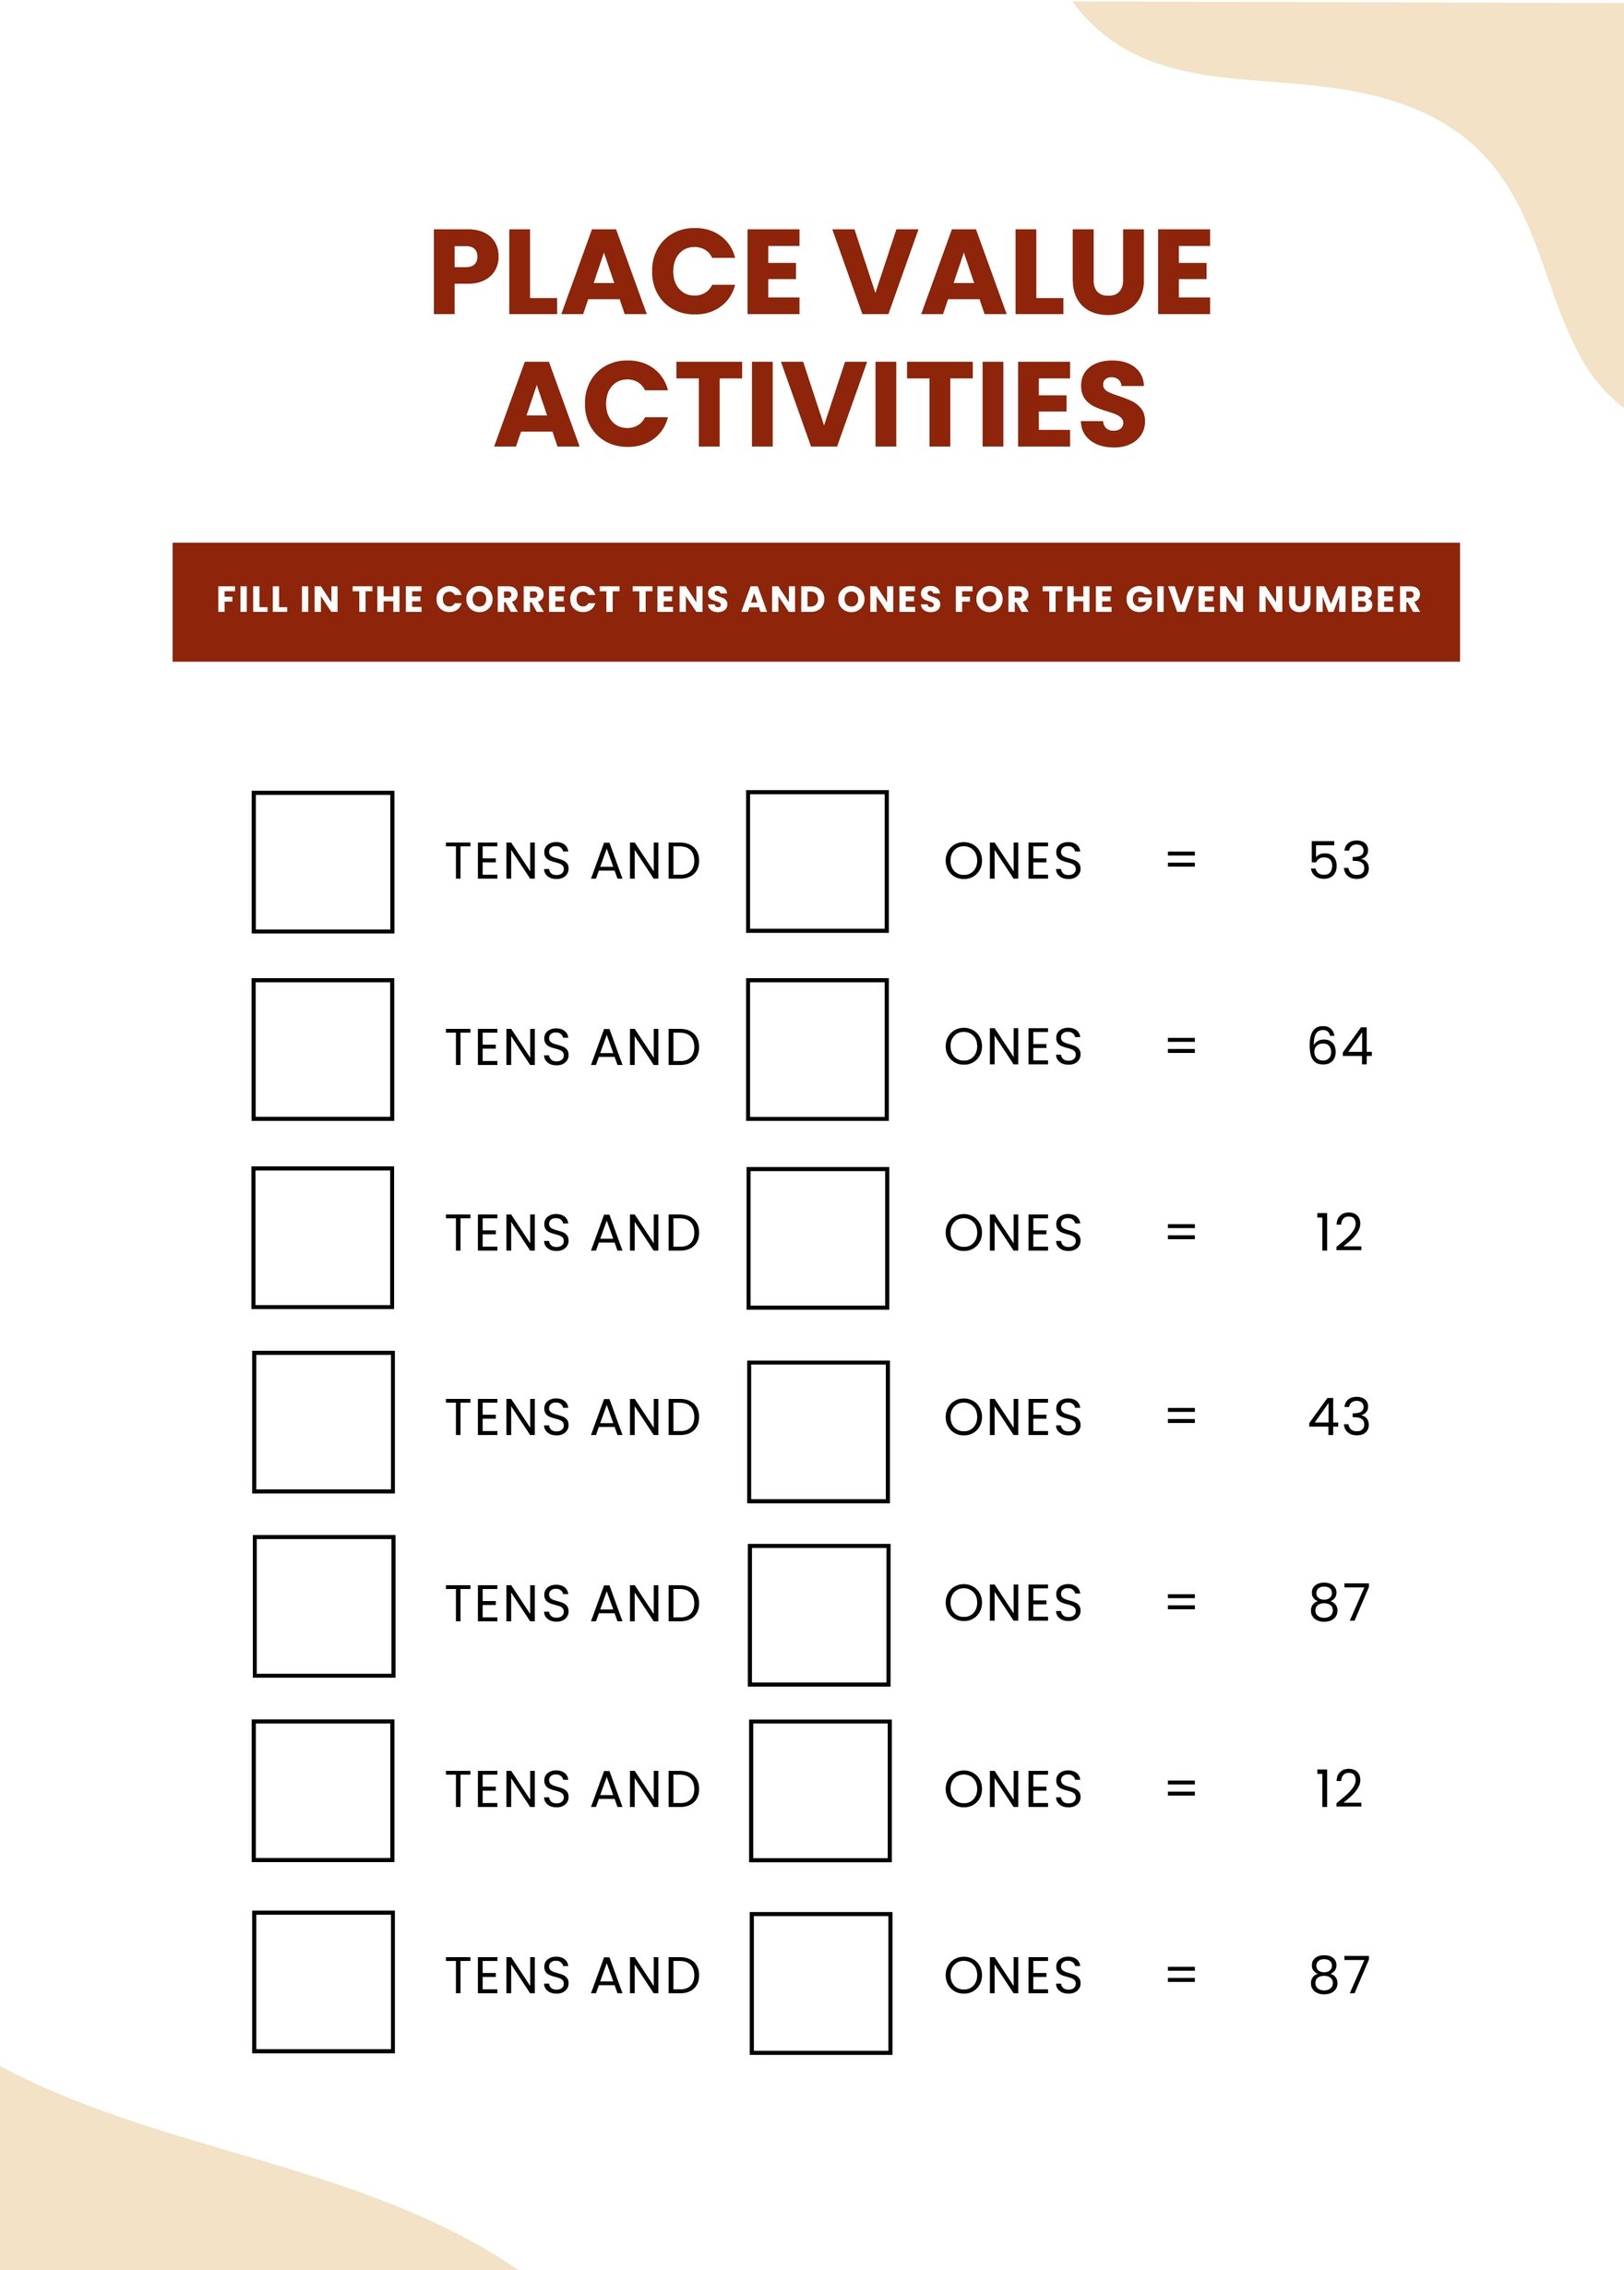 Free Place Value Activities Chart in PDF, Illustrator